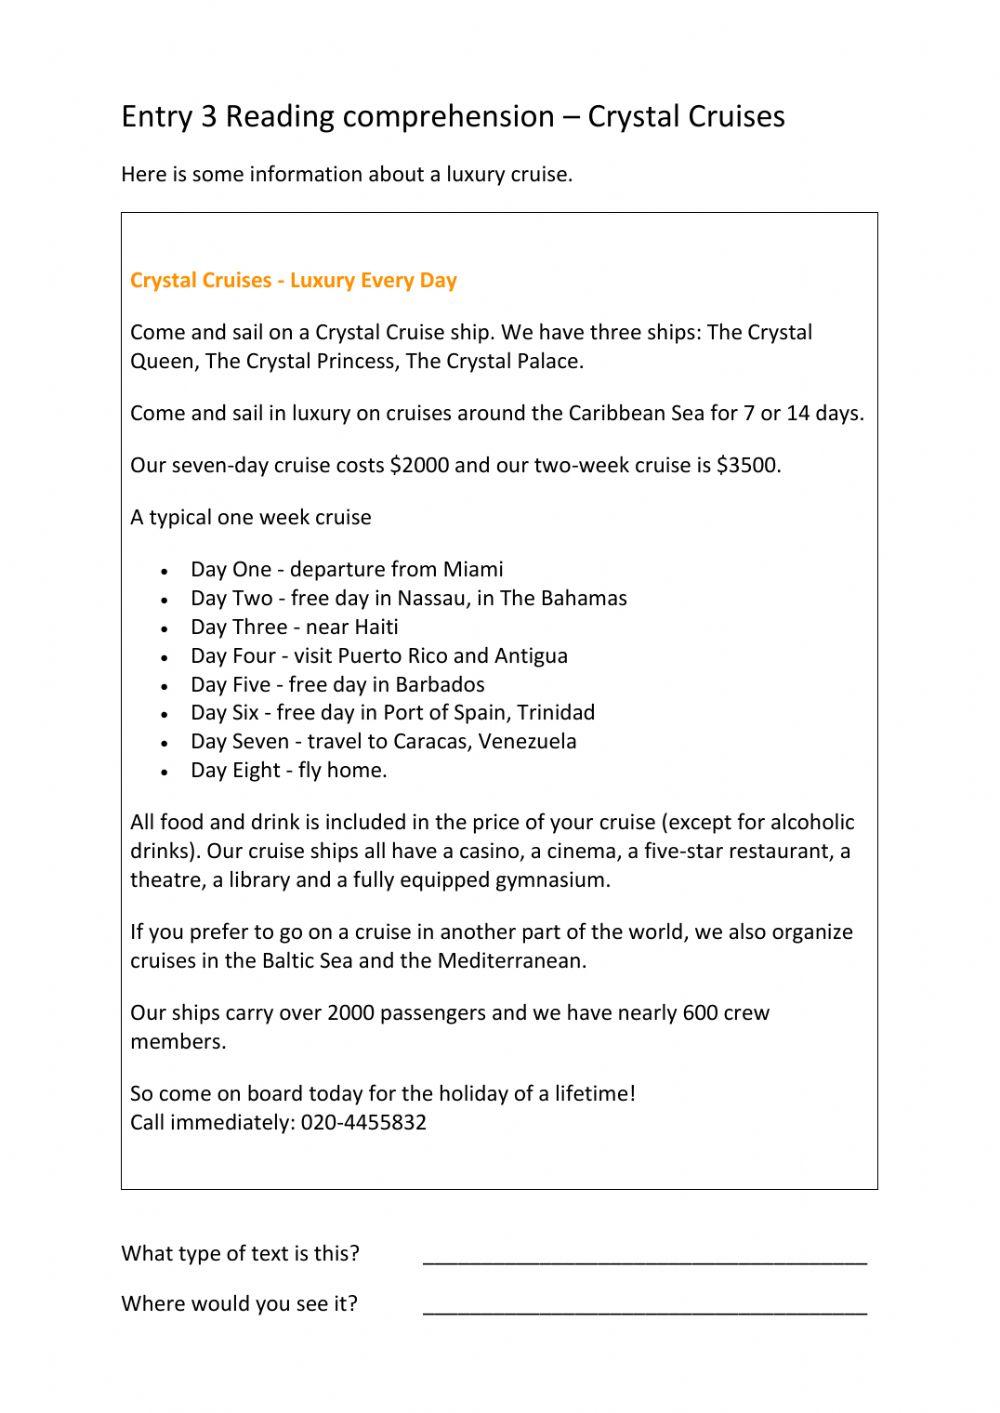 ESOL Entry 3 Reading Comp - Crystal cruises